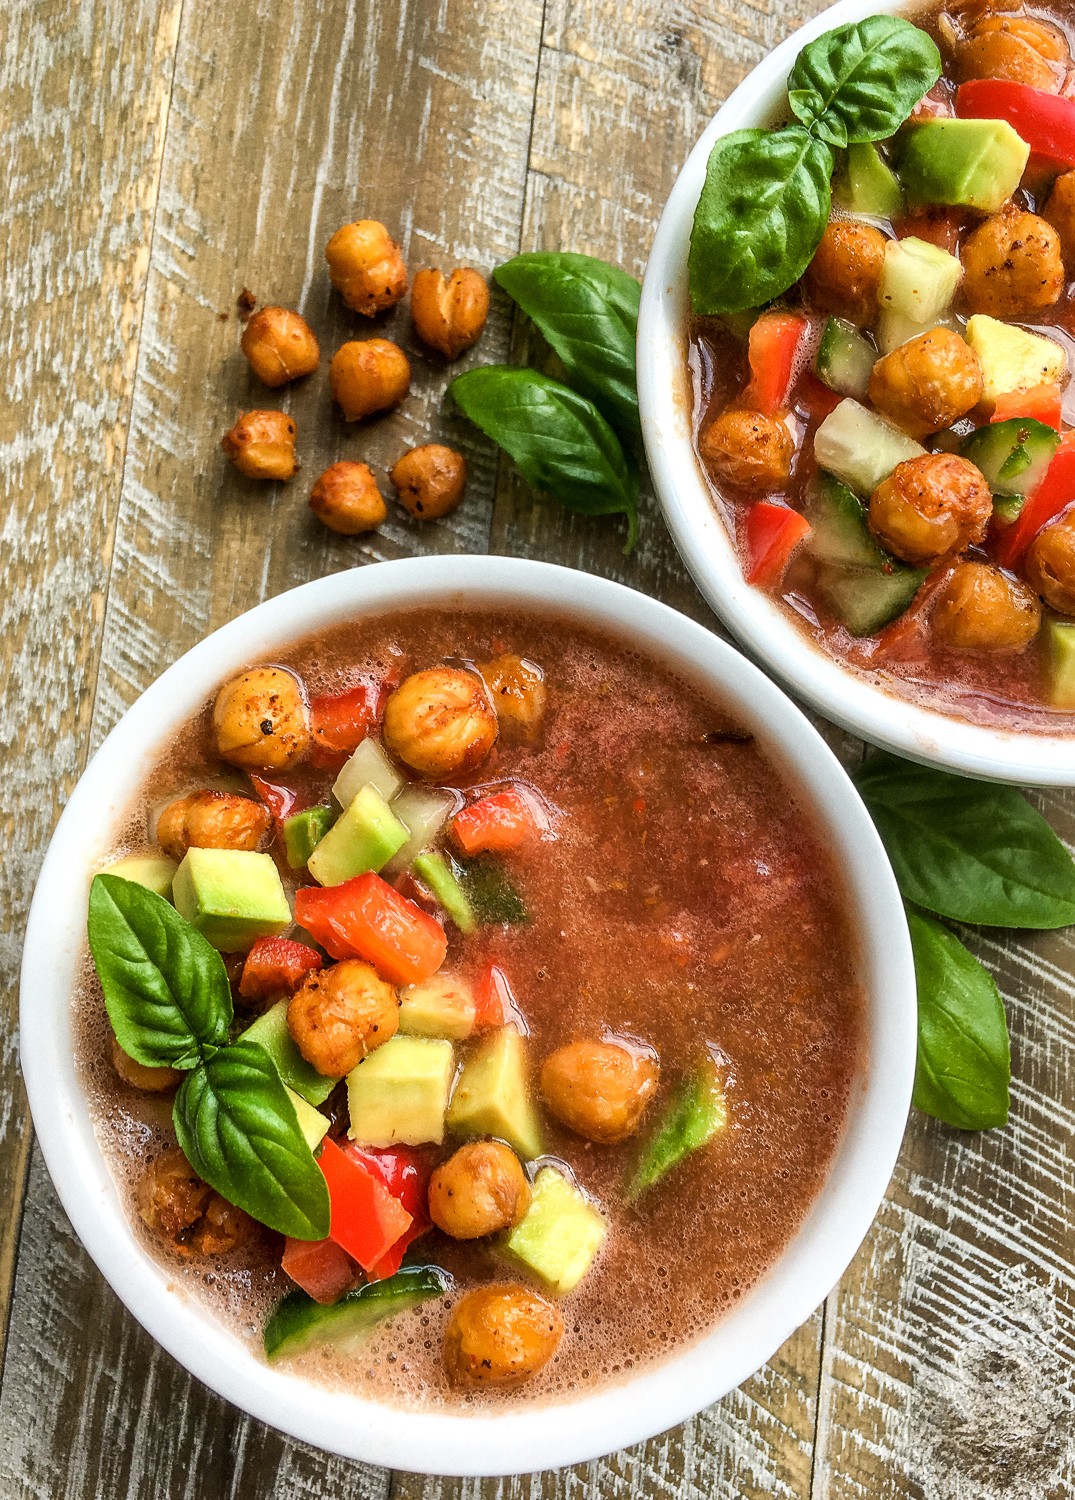 Gazpacho with Chickpea Croutons